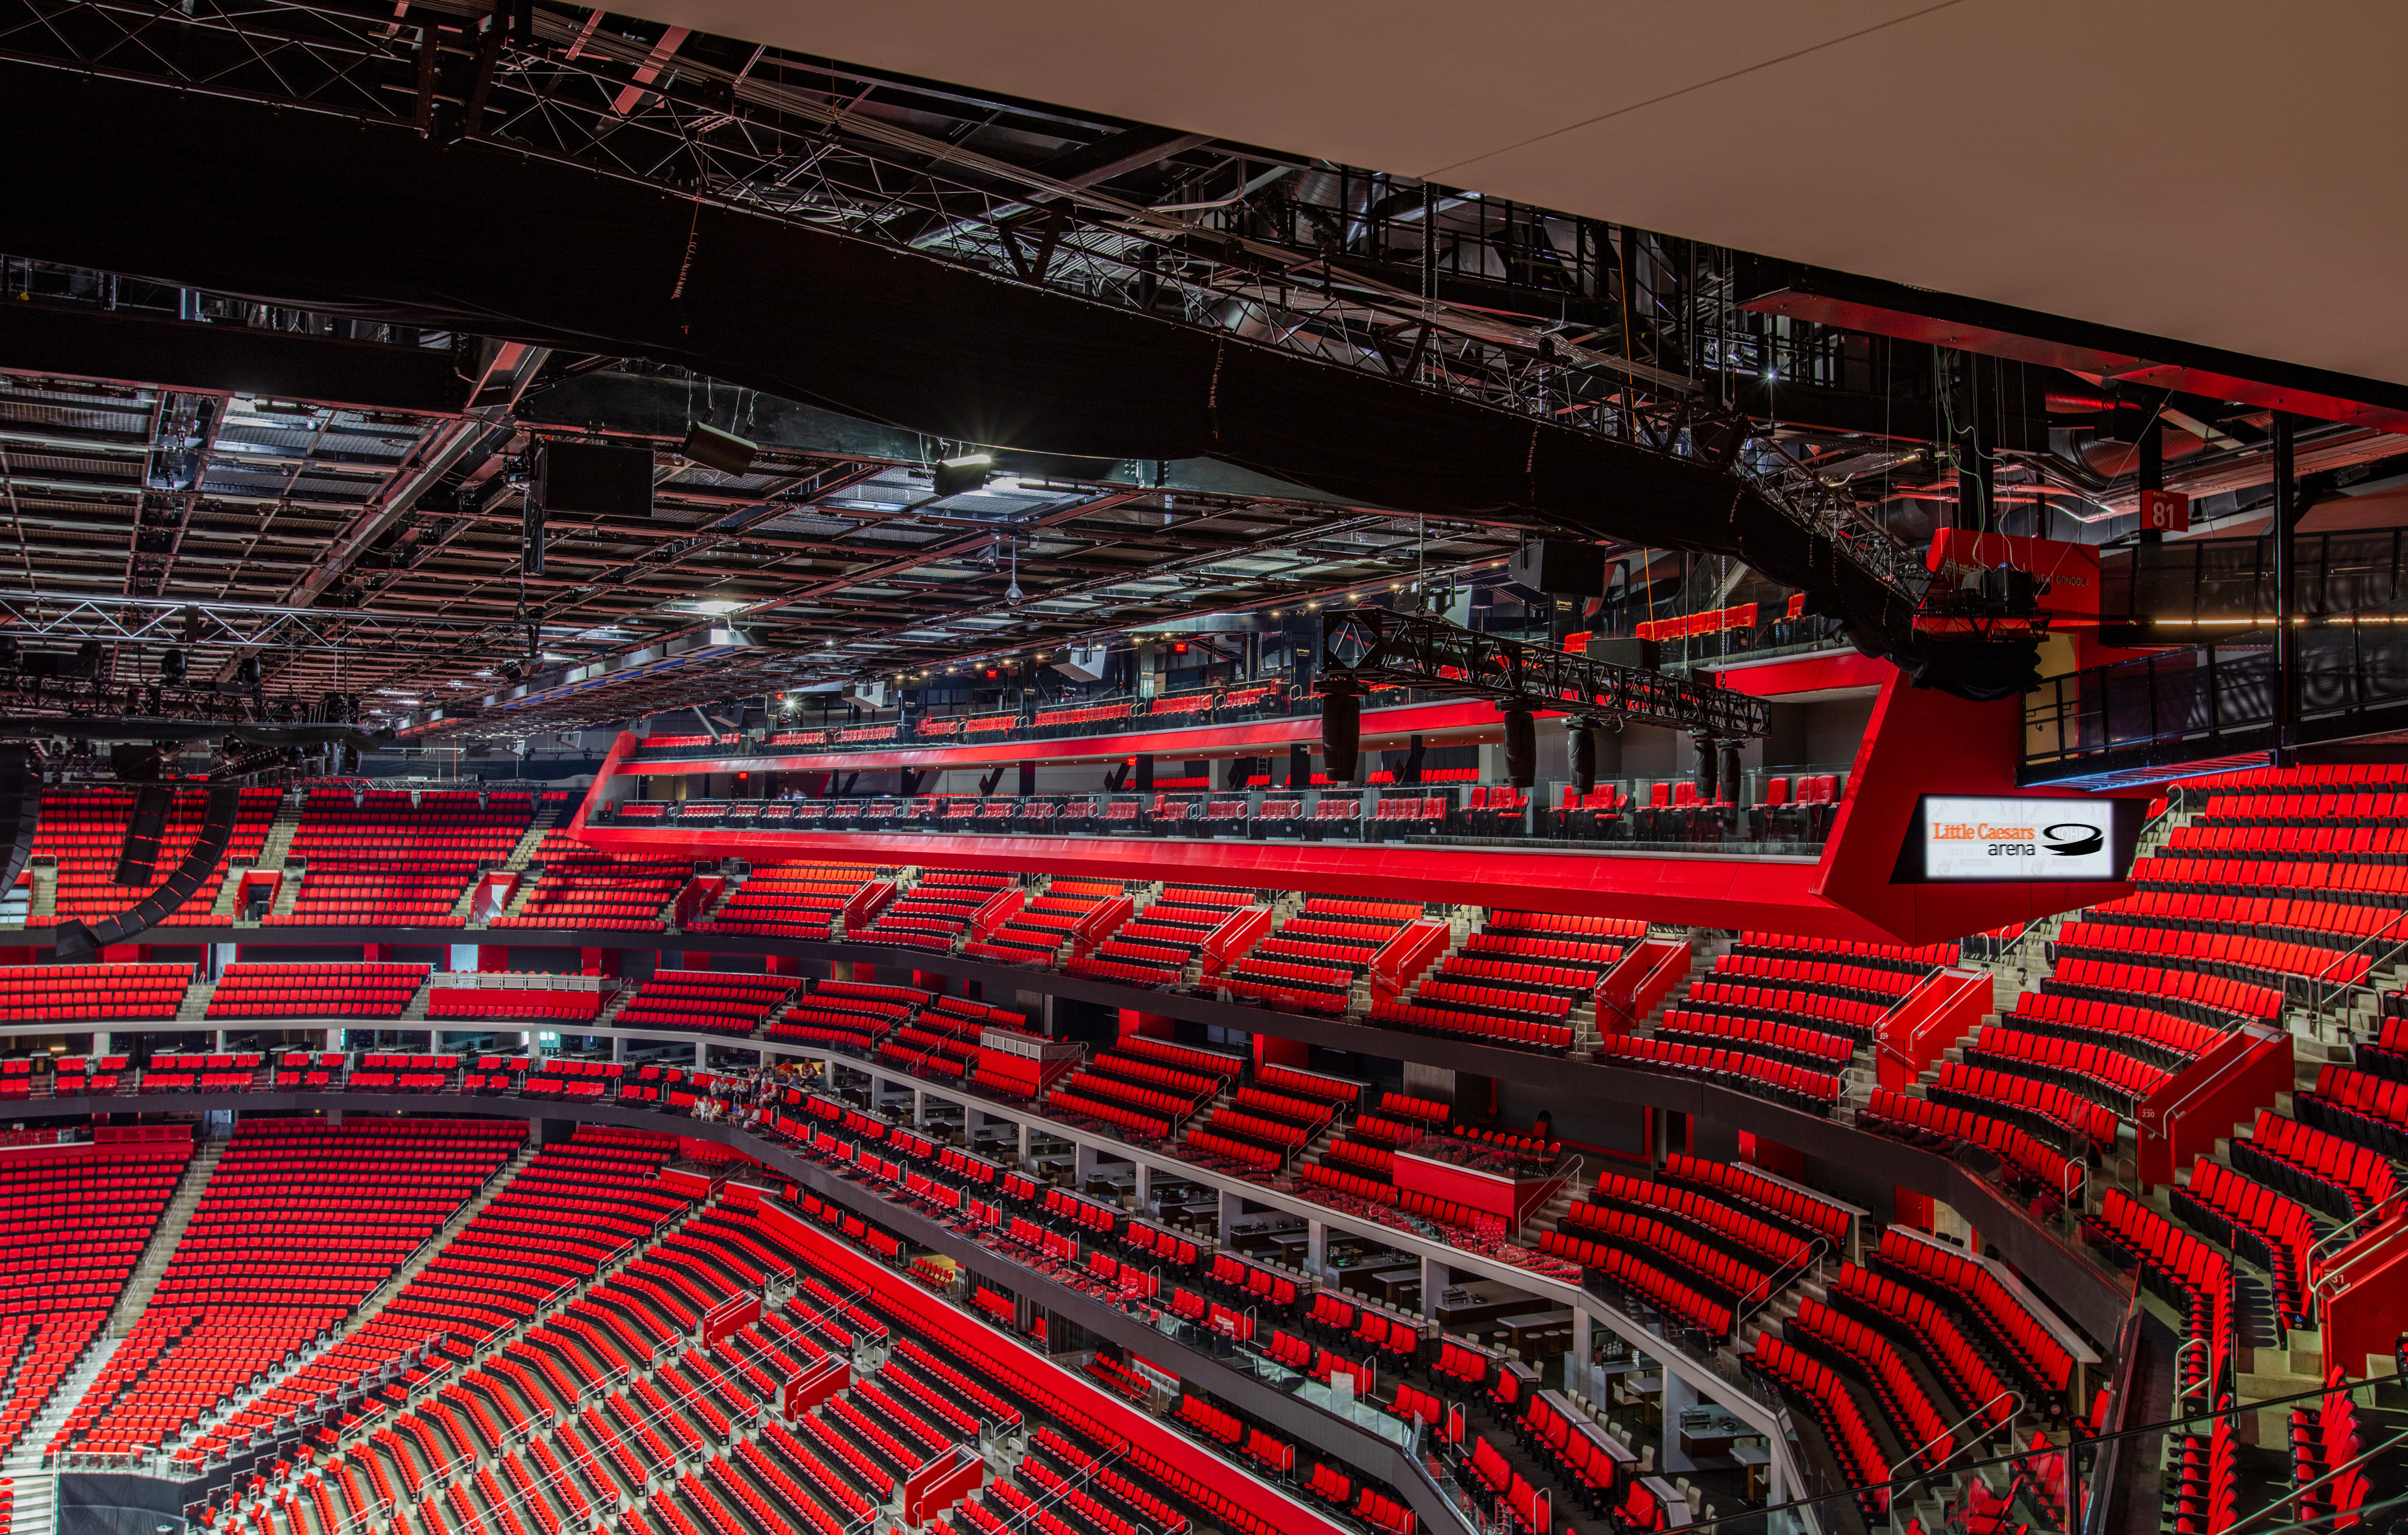 Little Caesars Arena and Elation Custom Light Ceiling in a Class by Itself